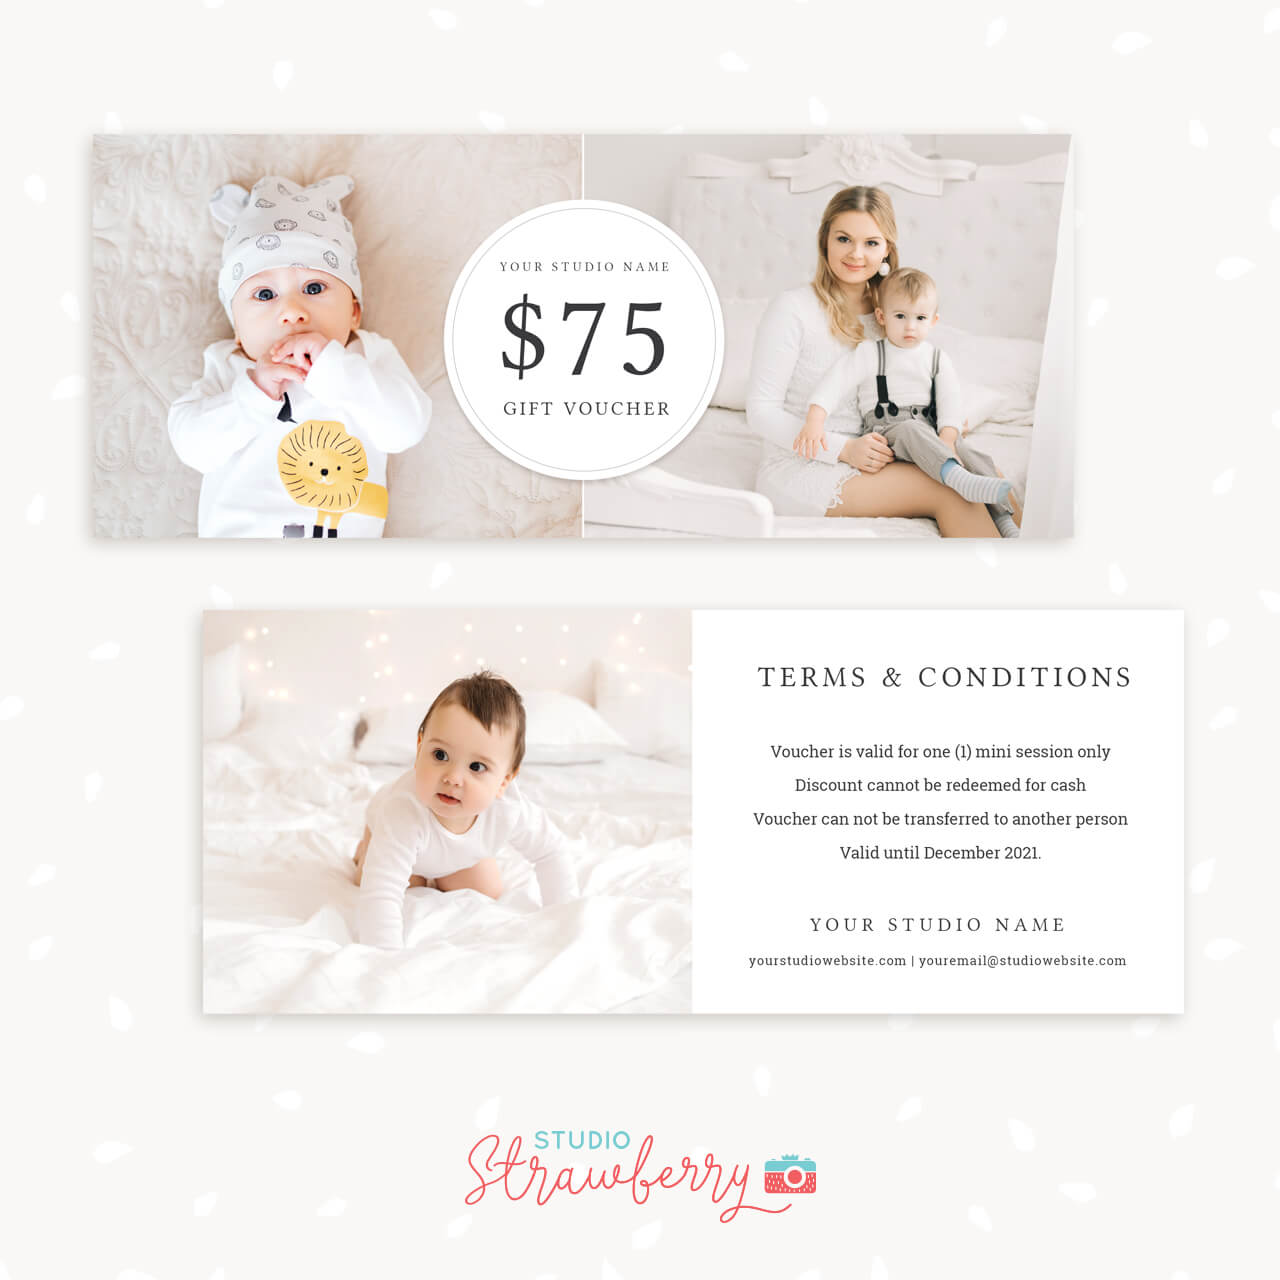 gift certificate terms and conditions template